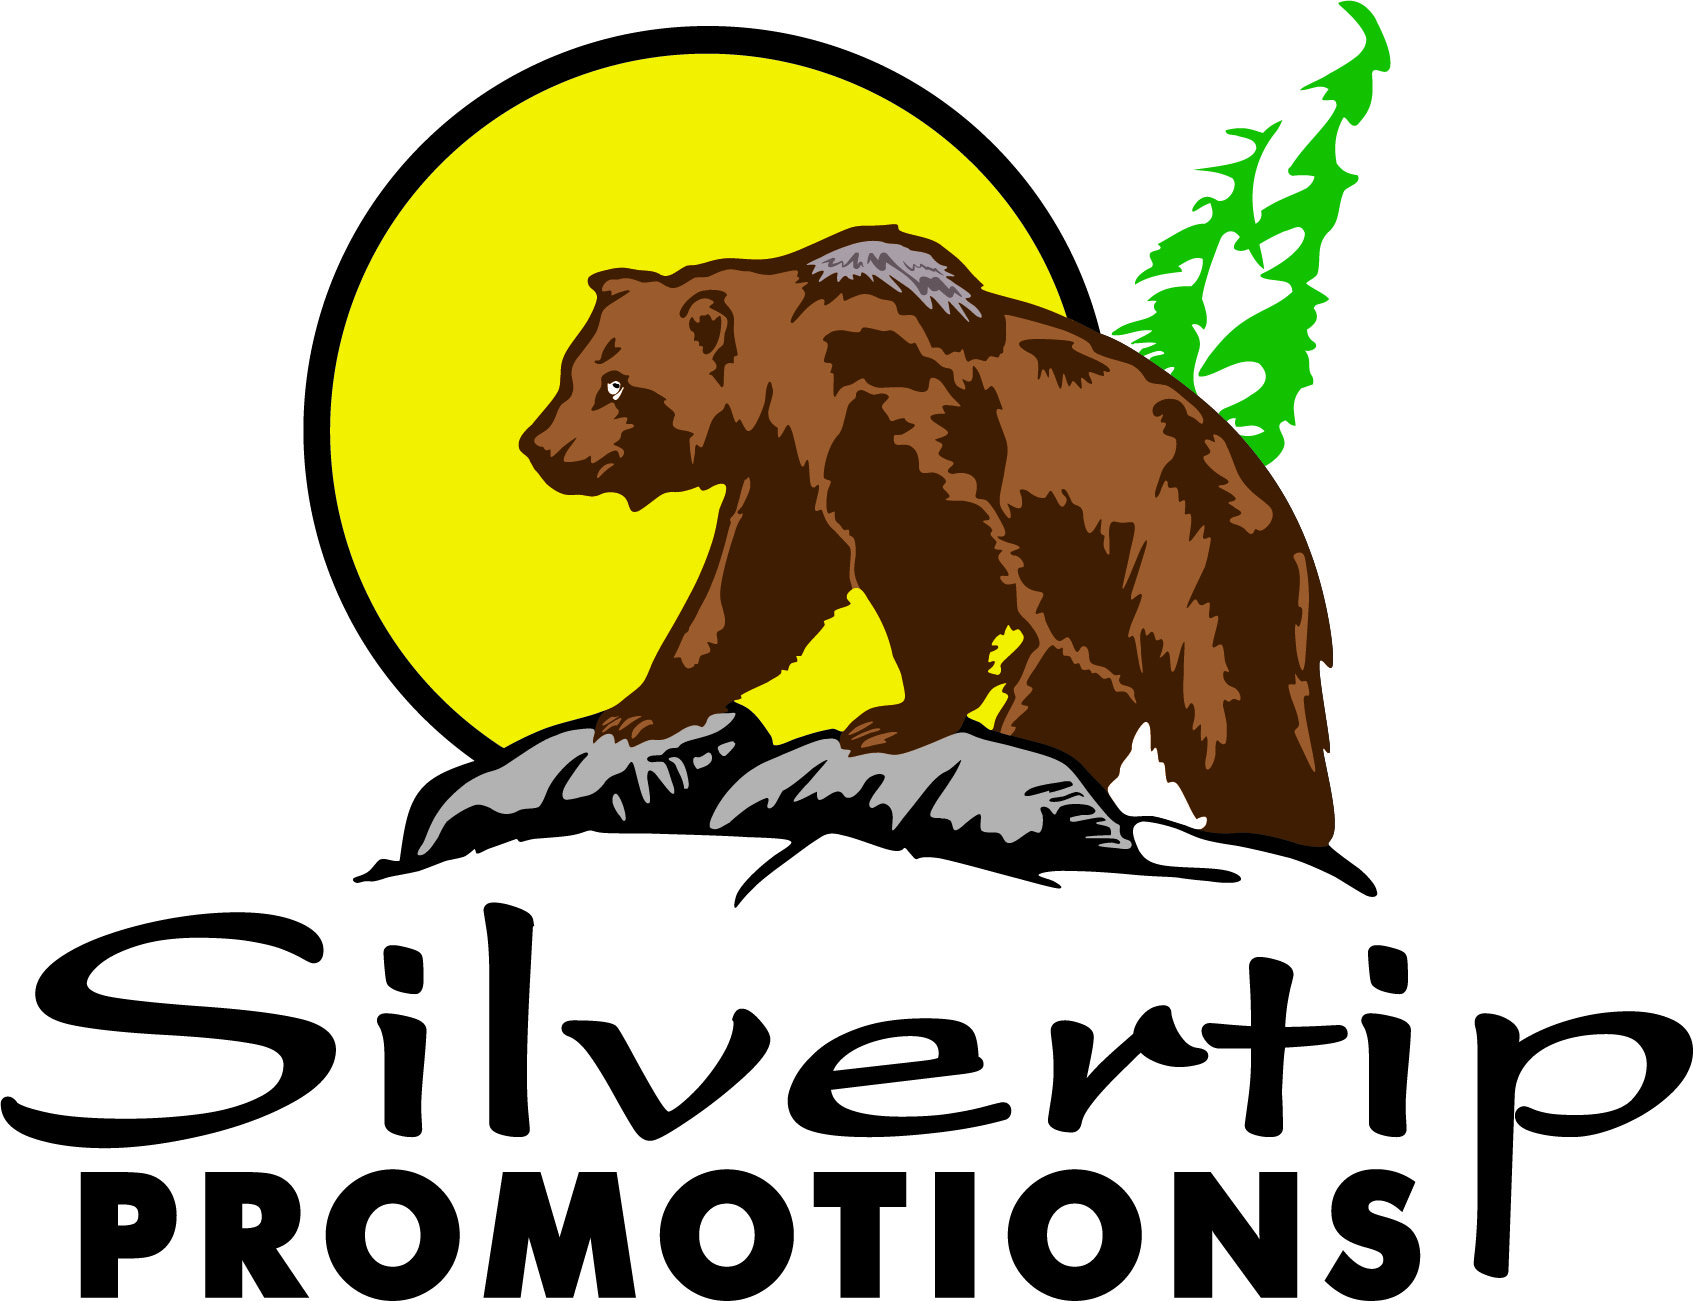 Silvertip Promotions